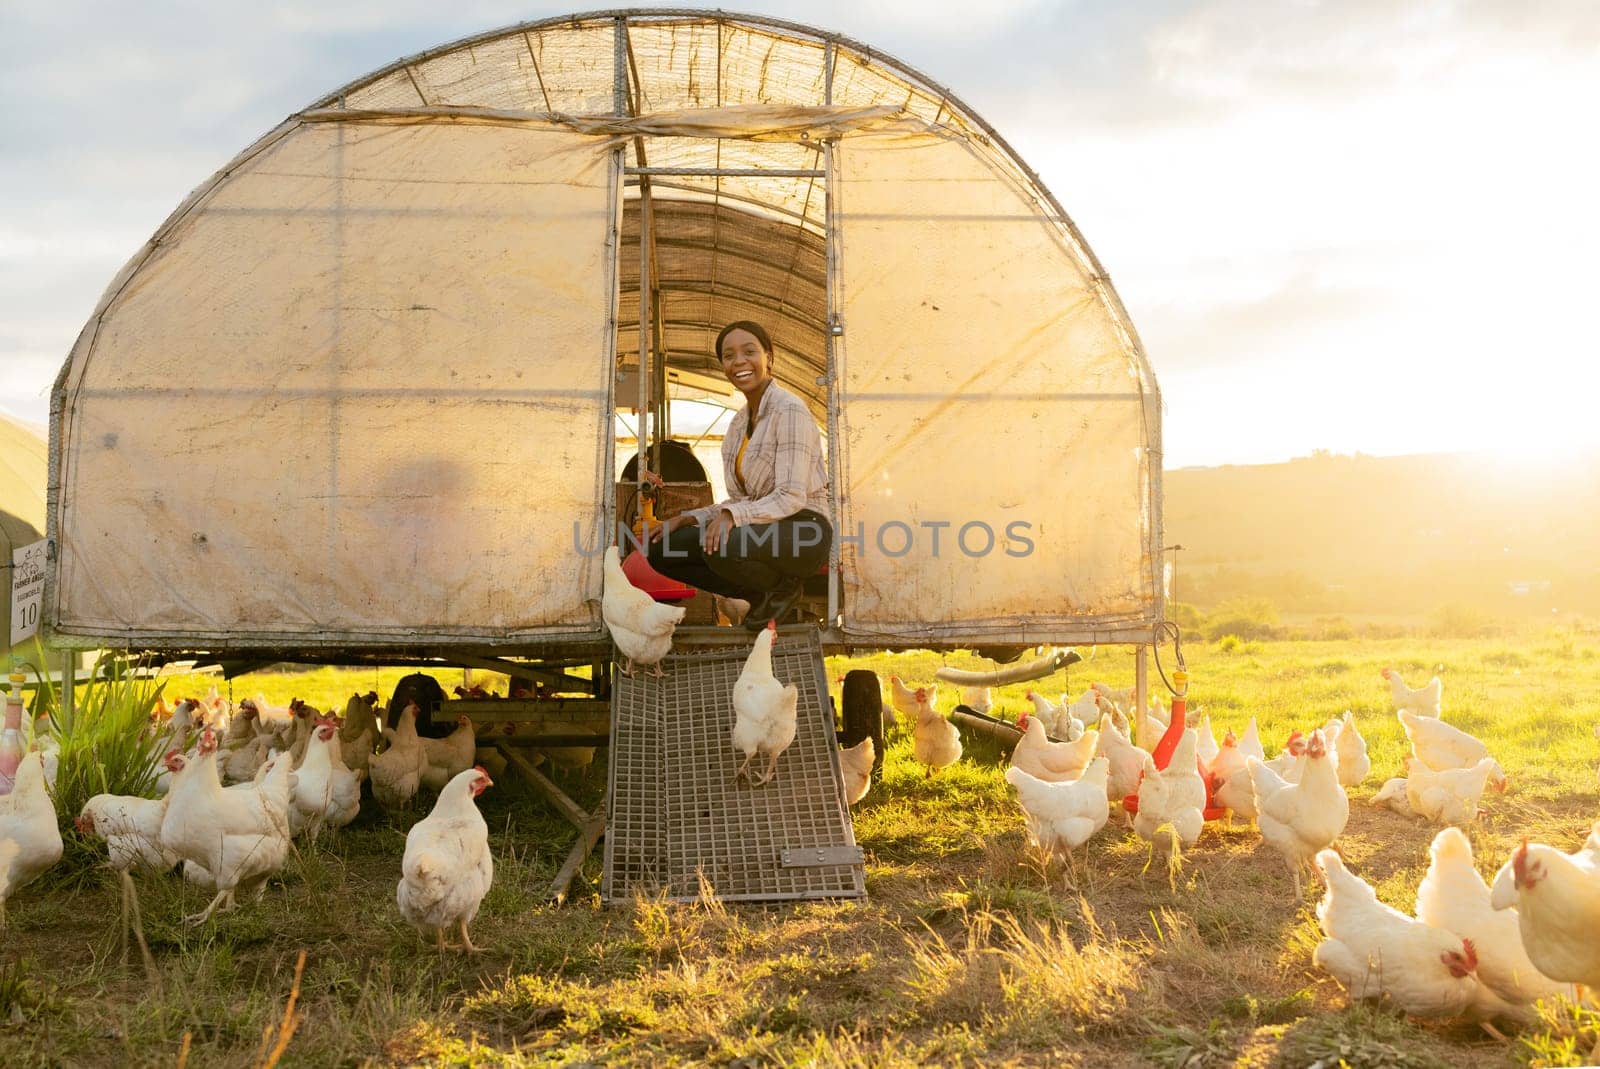 Poultry farm, black woman and chicken coop for sustainable farming outdoor on a field for meat, food and free range eggs. Farmer with animals to care and feed livestock on a sustainable ranch by YuriArcurs